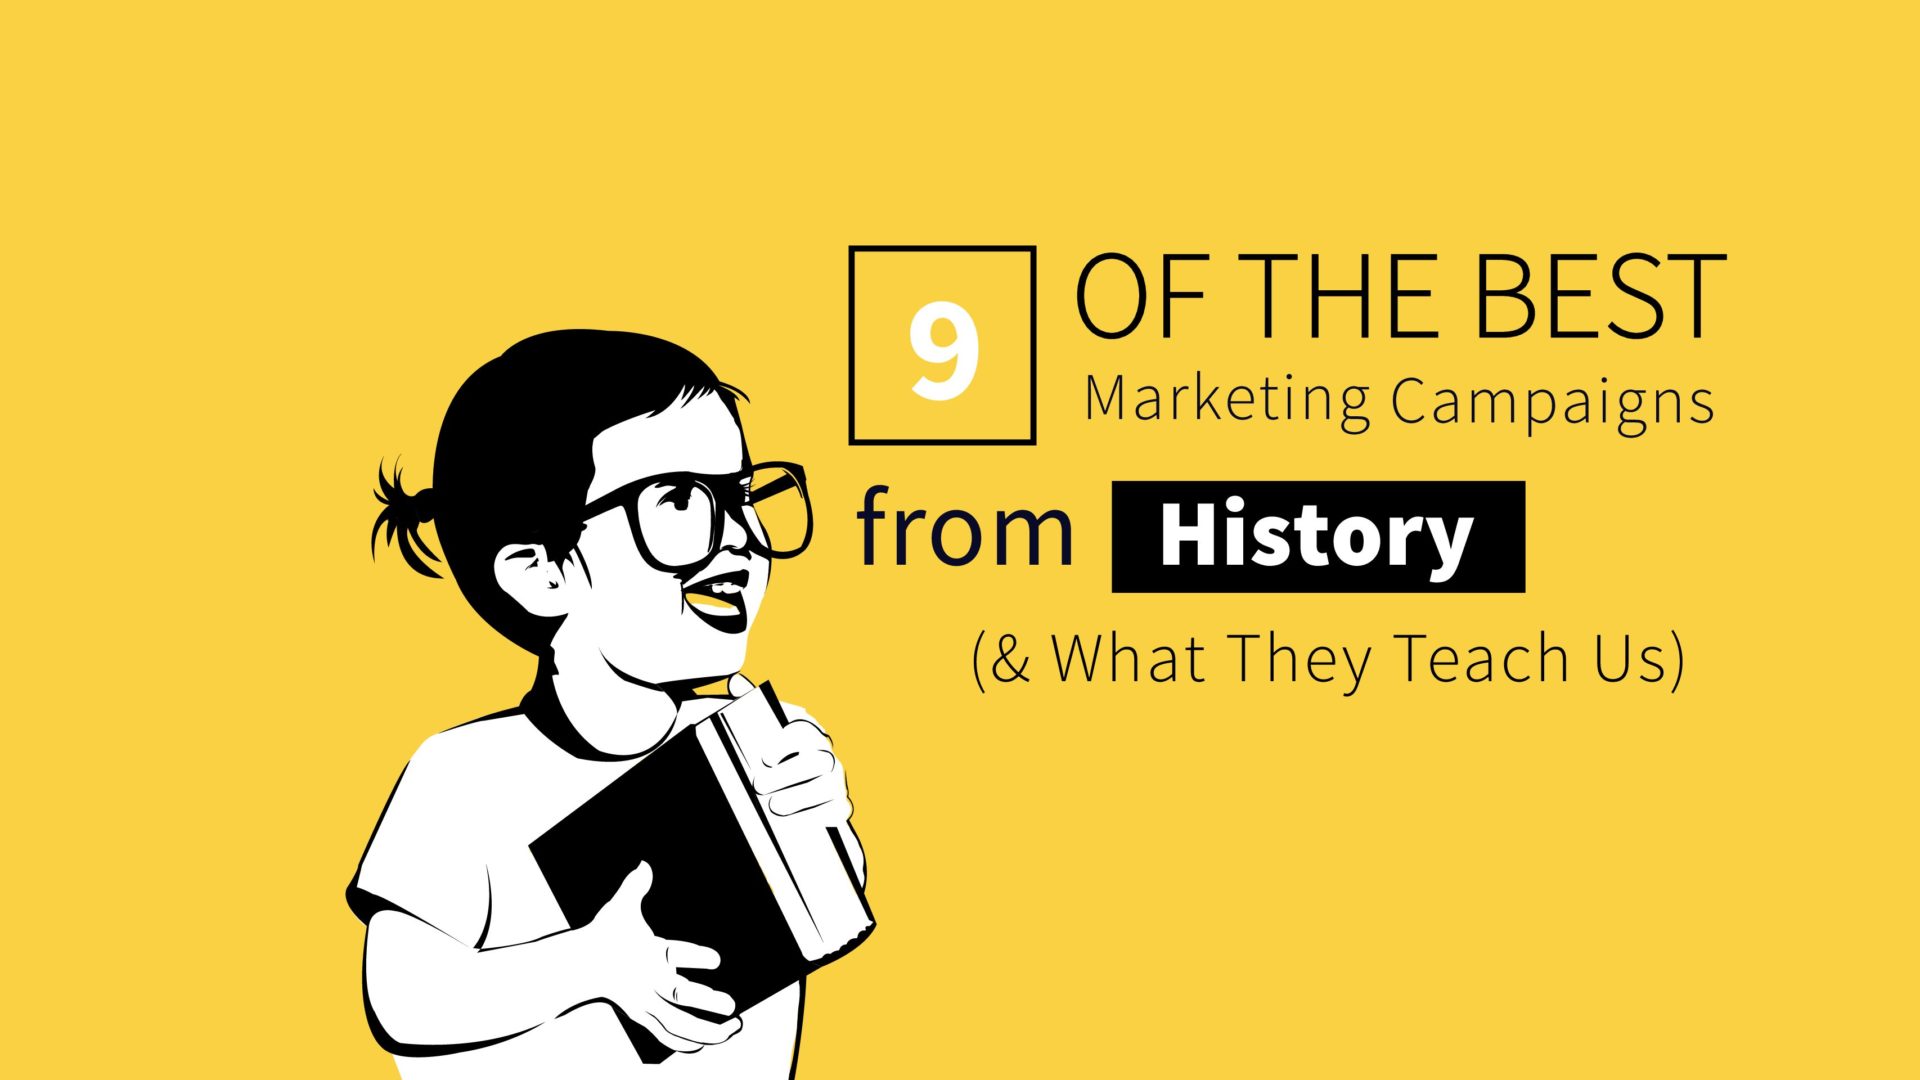 9 Of the Best Marketing Campaigns in History (And What They Teach Us)